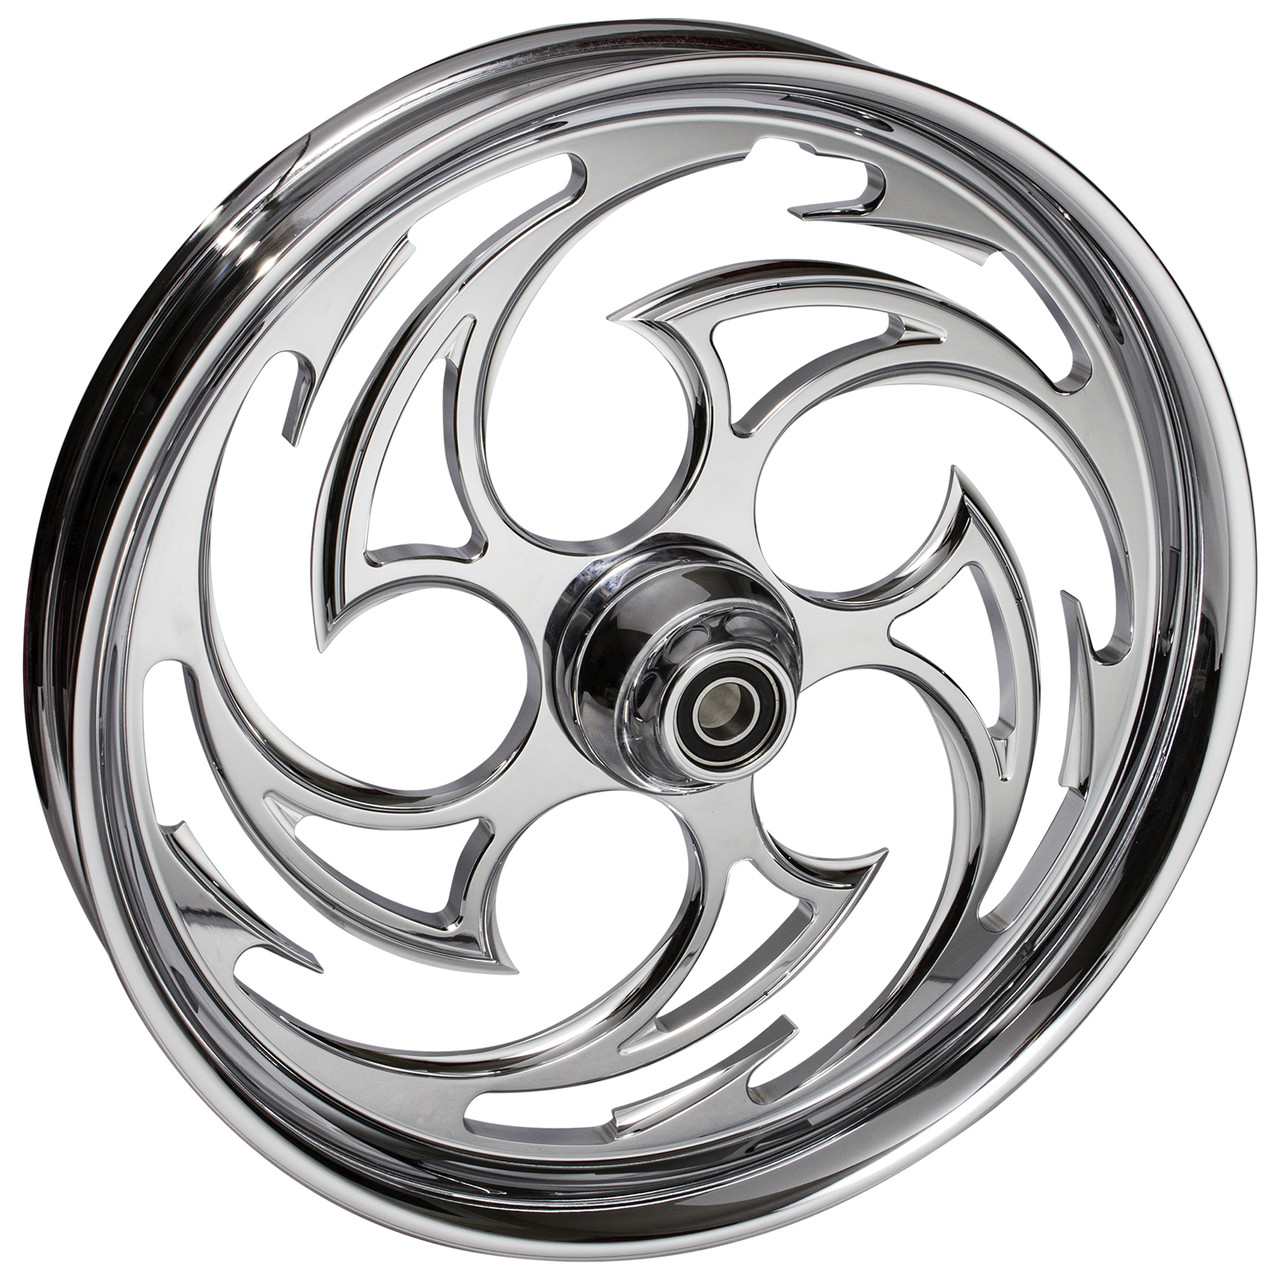 FTD Customs Chrome Harley Davidson 21 inch Fat Front Motorcycle Wheels